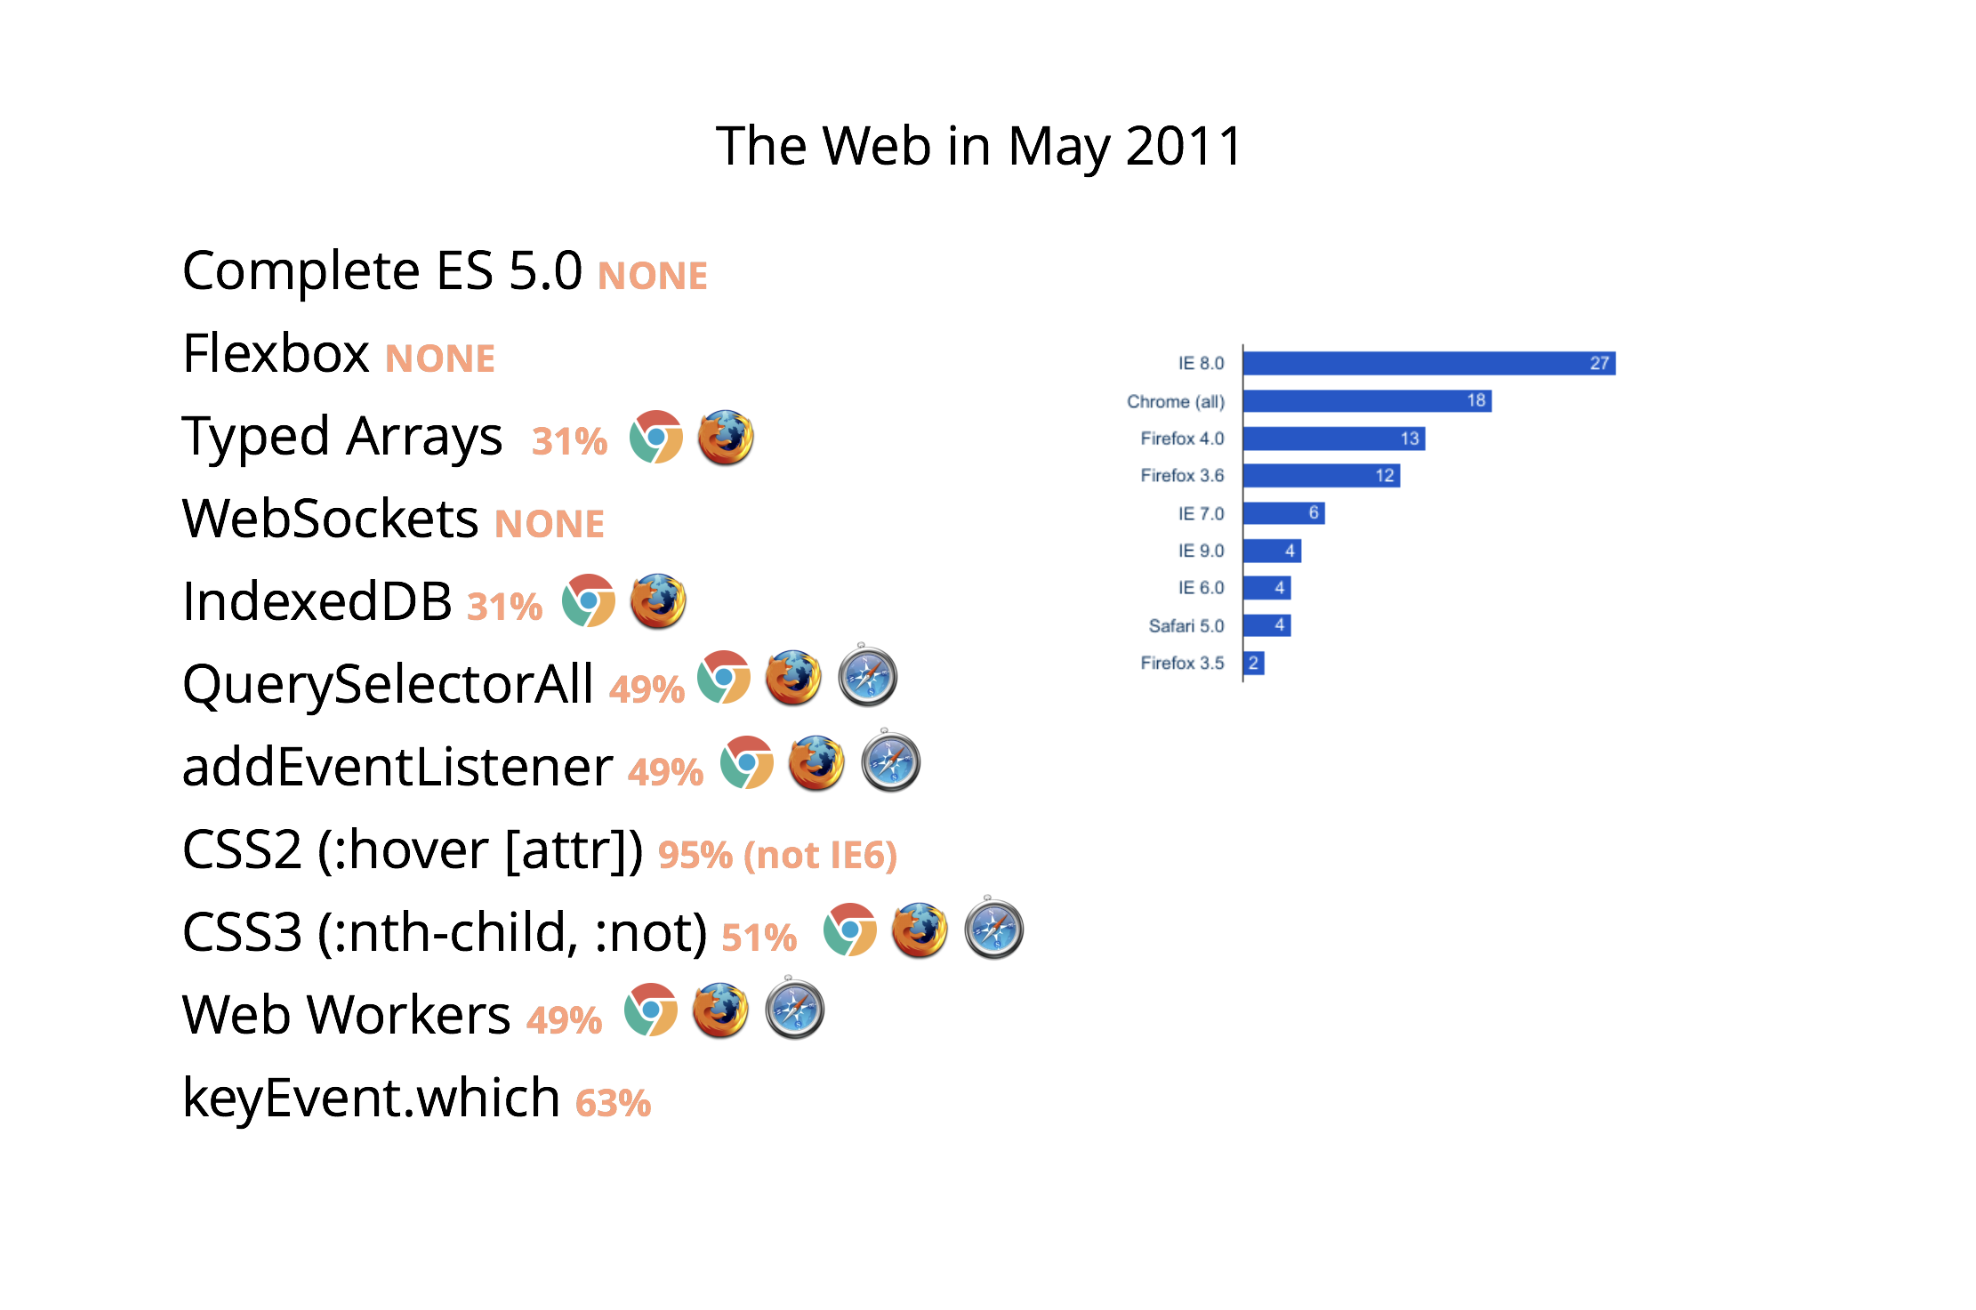 Slide showing the state of the web in 2011. No browsers implement WebSockets, Flexbox doesn't exist, only 49% of browsers have Web Workers, and IE8 has 27% market share. Chrome (all versions) is a distant second place at 18% market share.